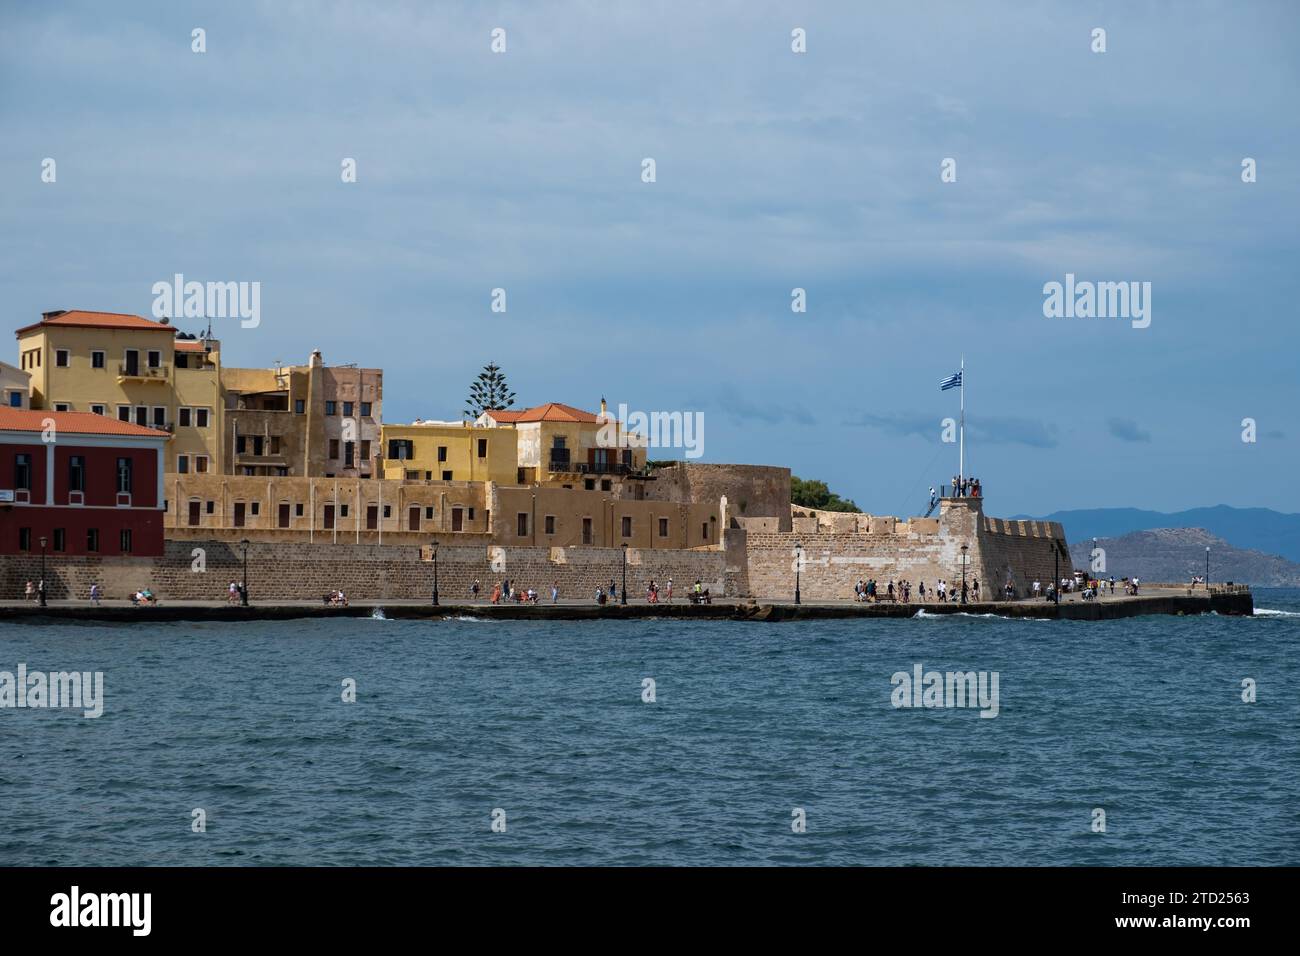 Firkas Fortress at harbor of the Old Town of Chania Crete, Greece. Revellino castle, venetian fort at seaside, summer sunny day, travel destination. Stock Photo